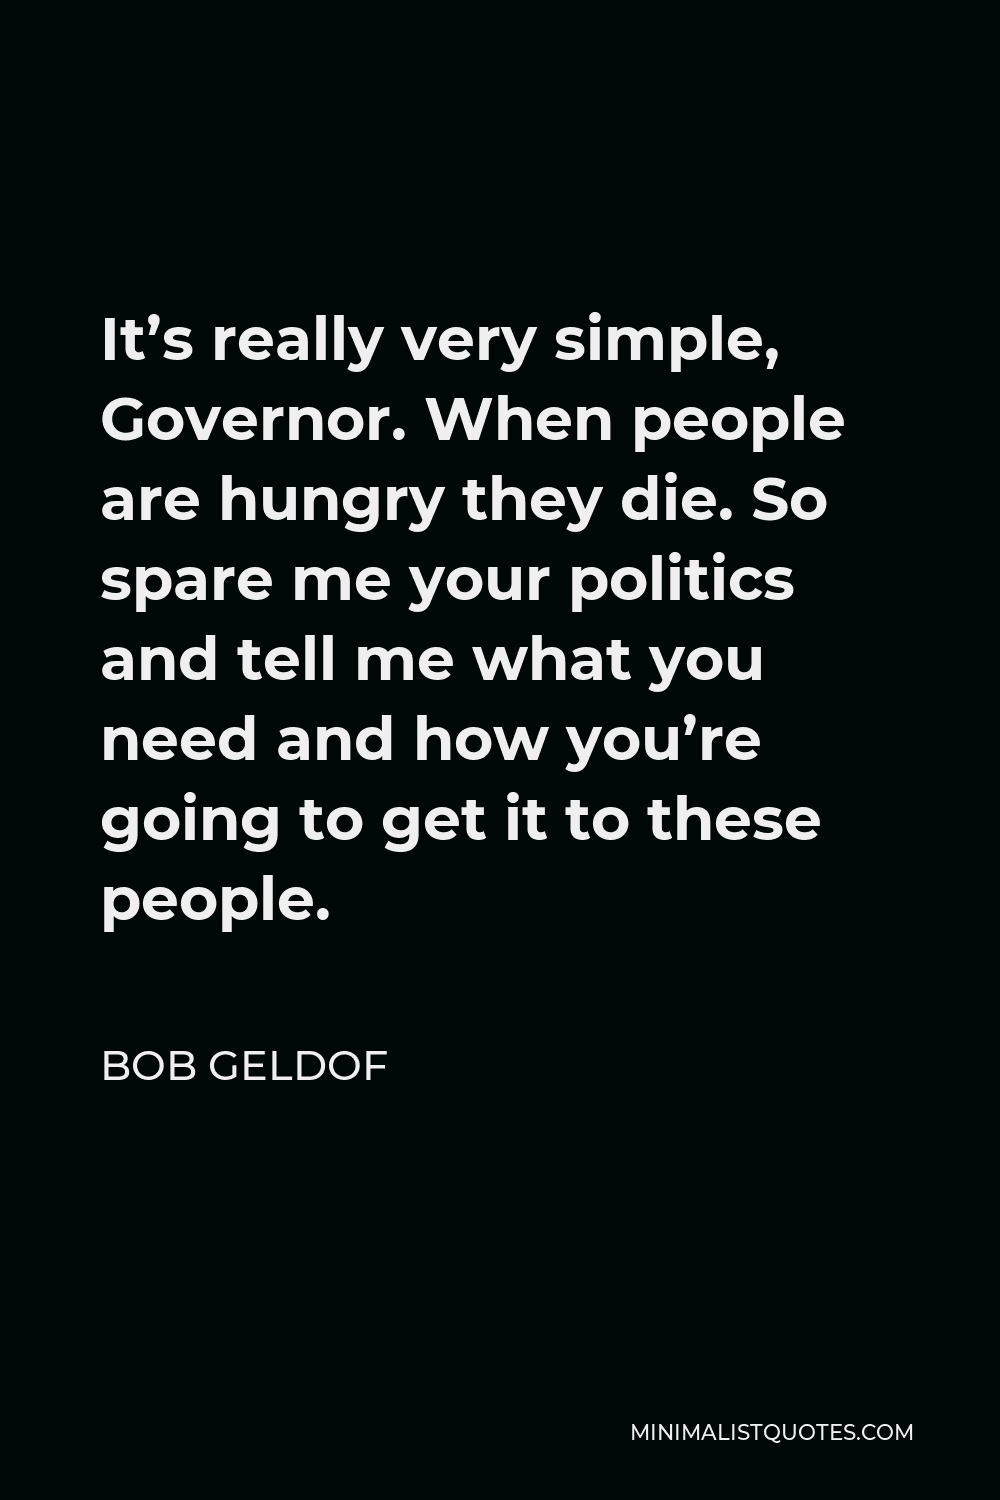 Bob Geldof Quote - It’s really very simple, Governor. When people are hungry they die. So spare me your politics and tell me what you need and how you’re going to get it to these people.